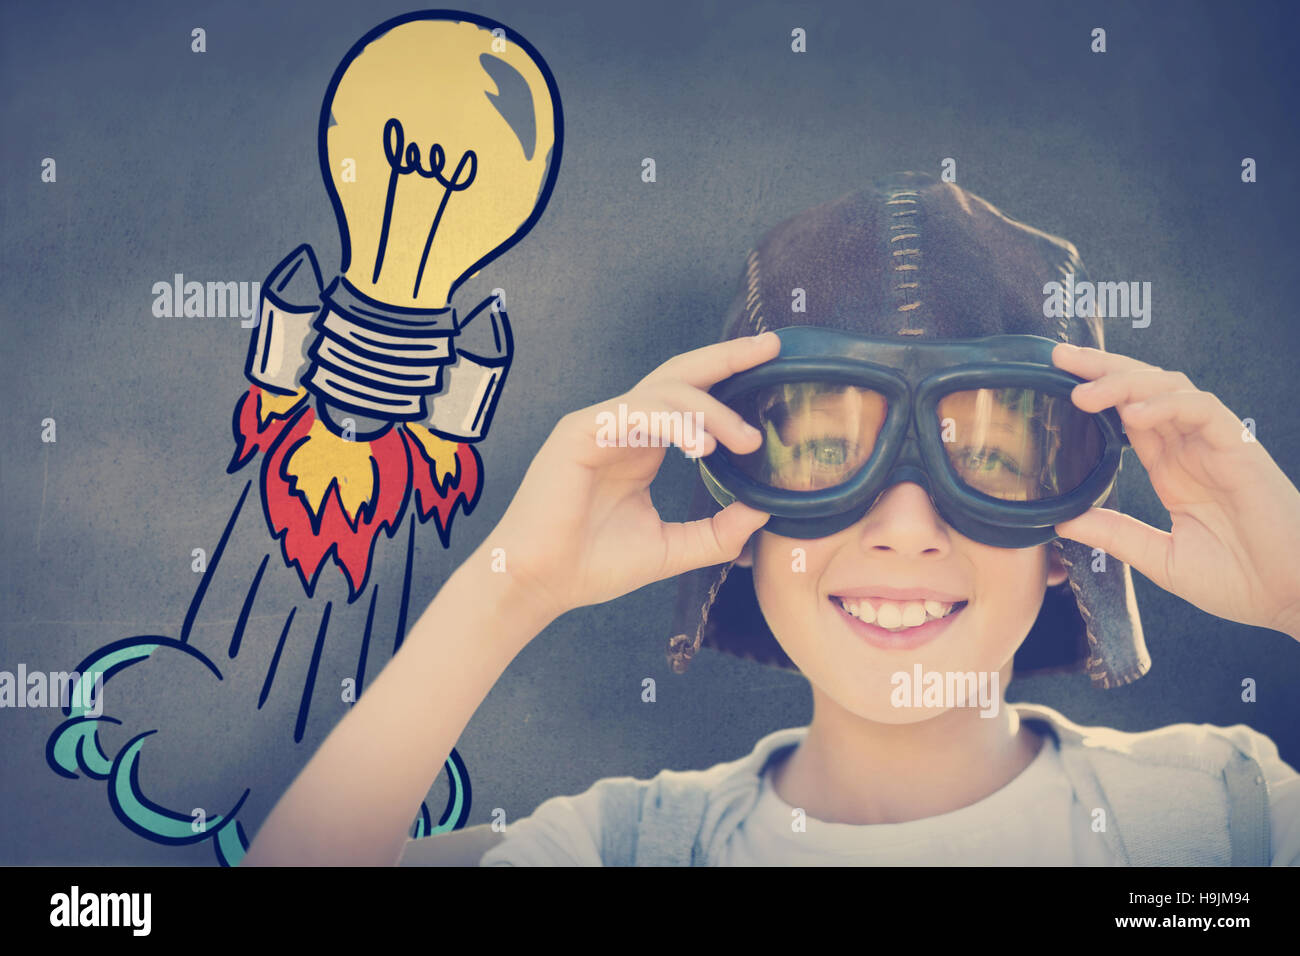 Composite image of portrait image of boy with flying goggles Stock Photo